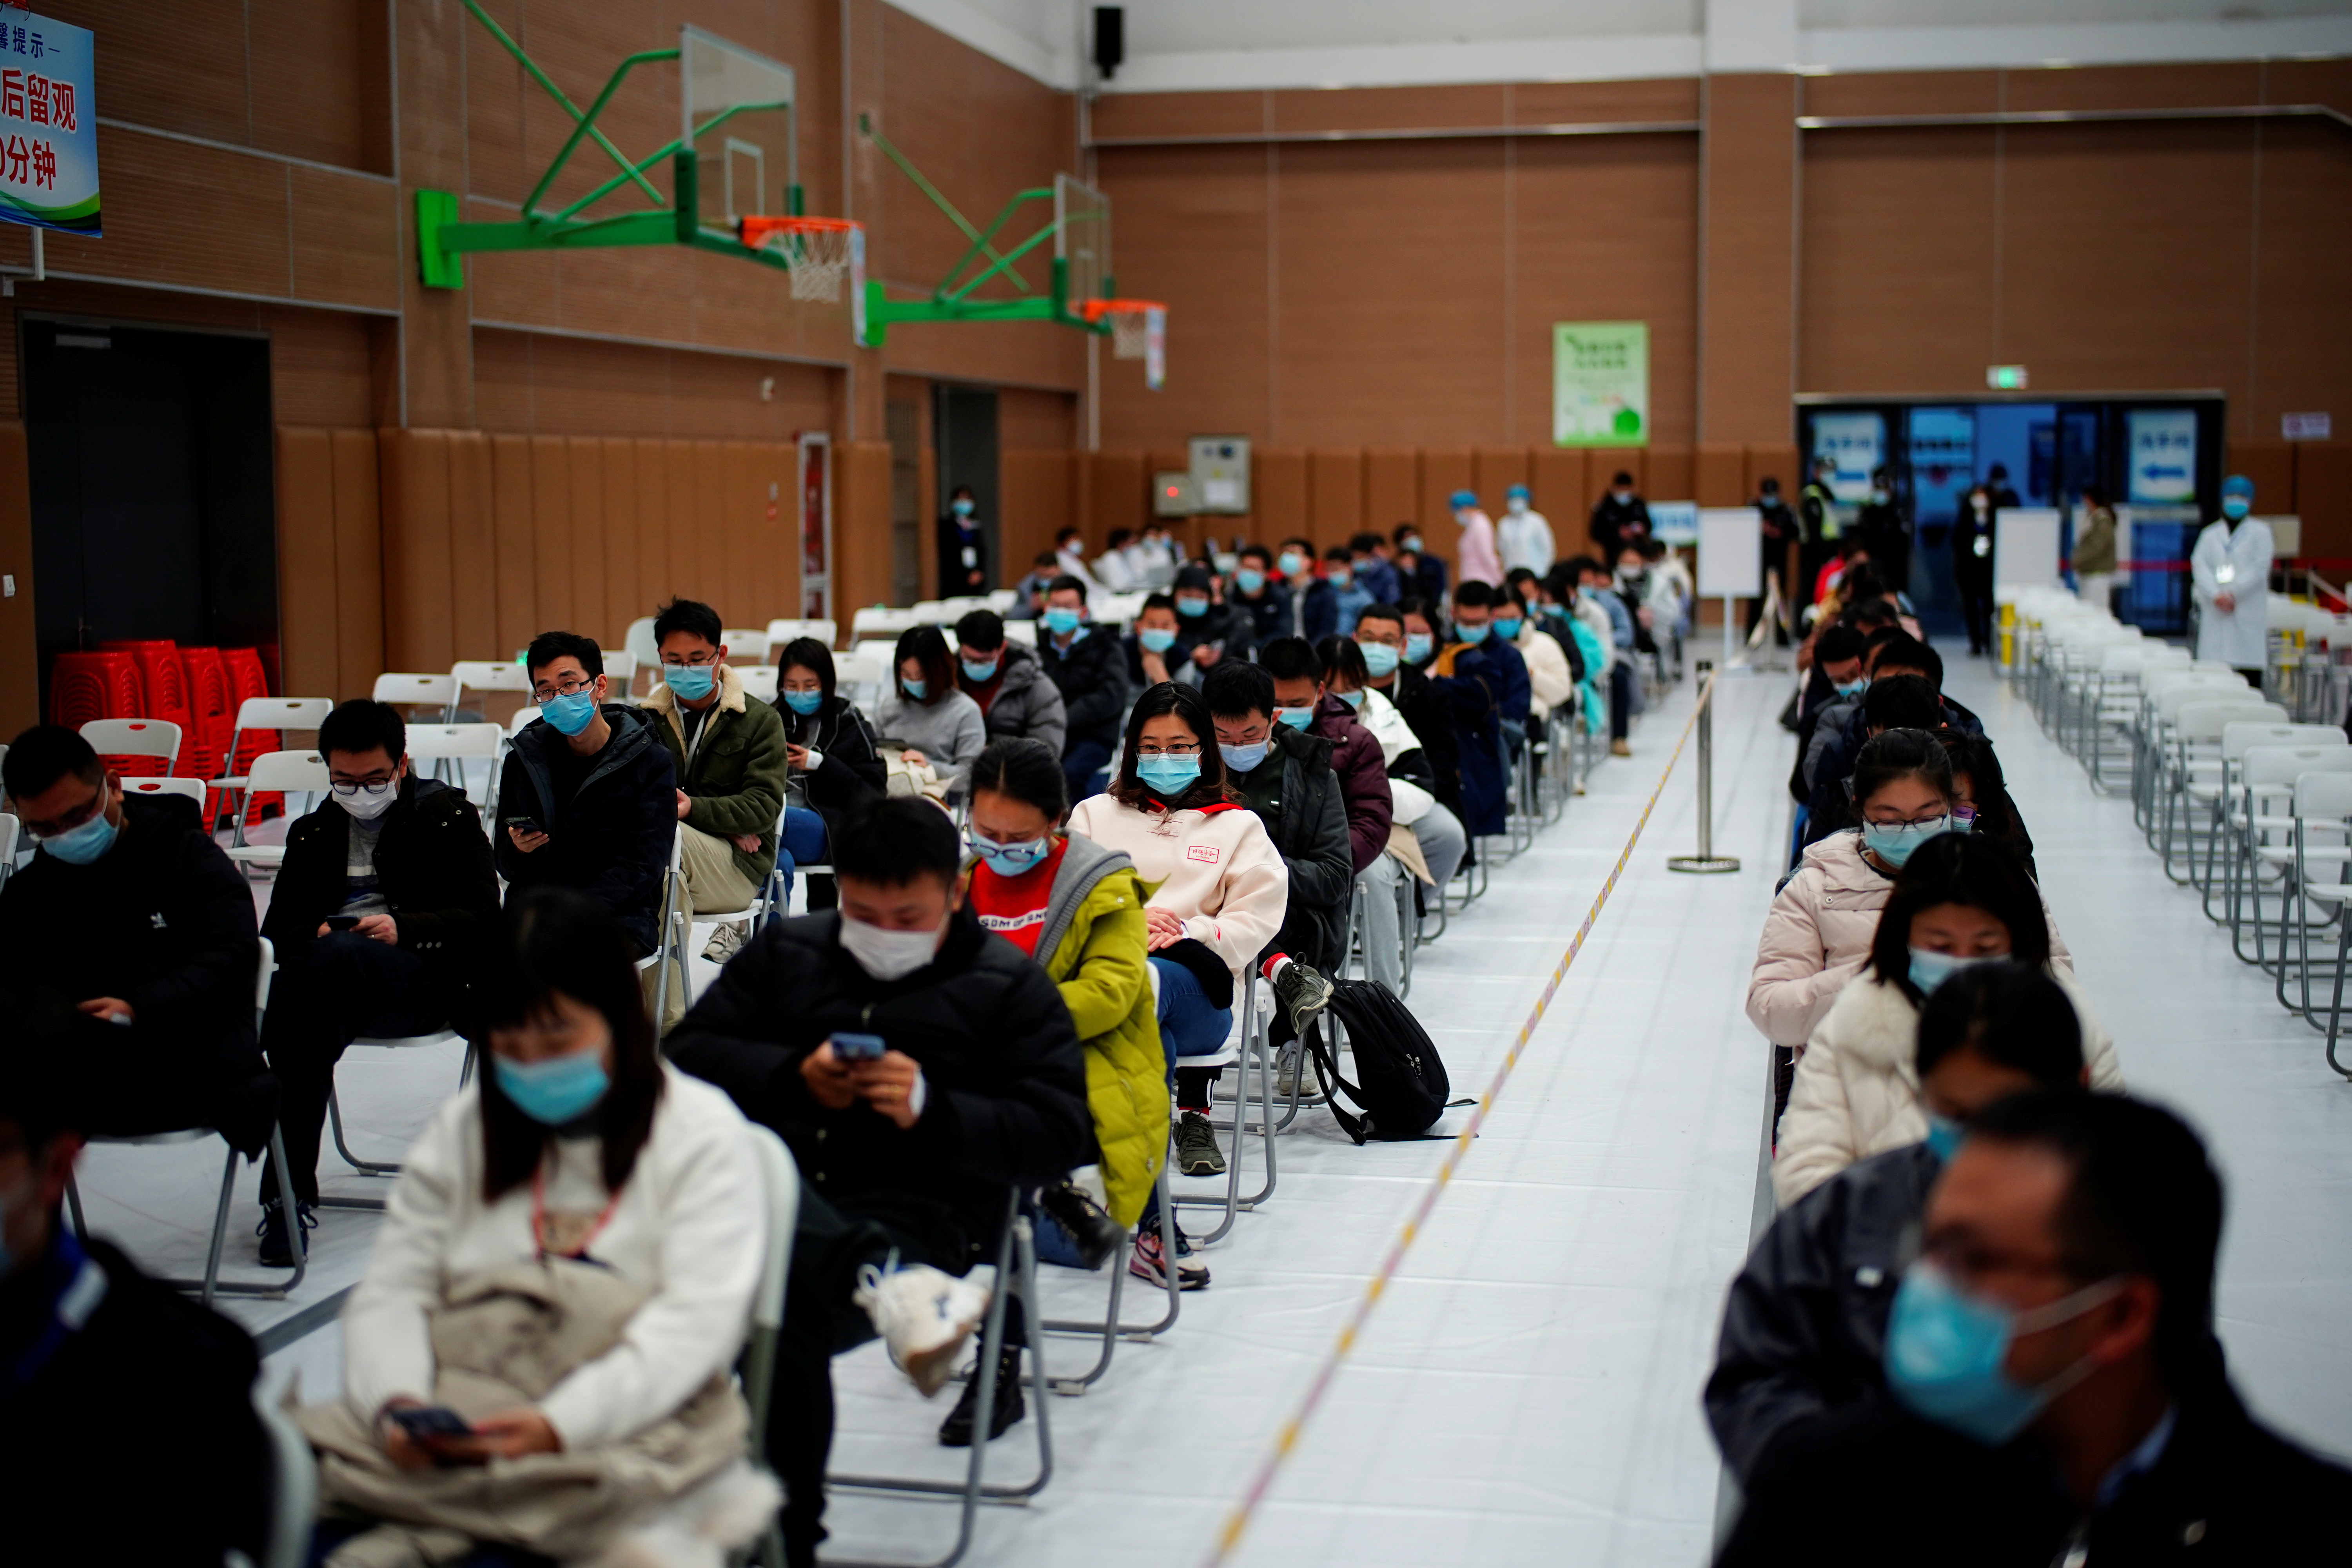 People sit at a vaccination site after receiving a dose of a coronavirus disease (COVID-19) vaccine, in Shanghai